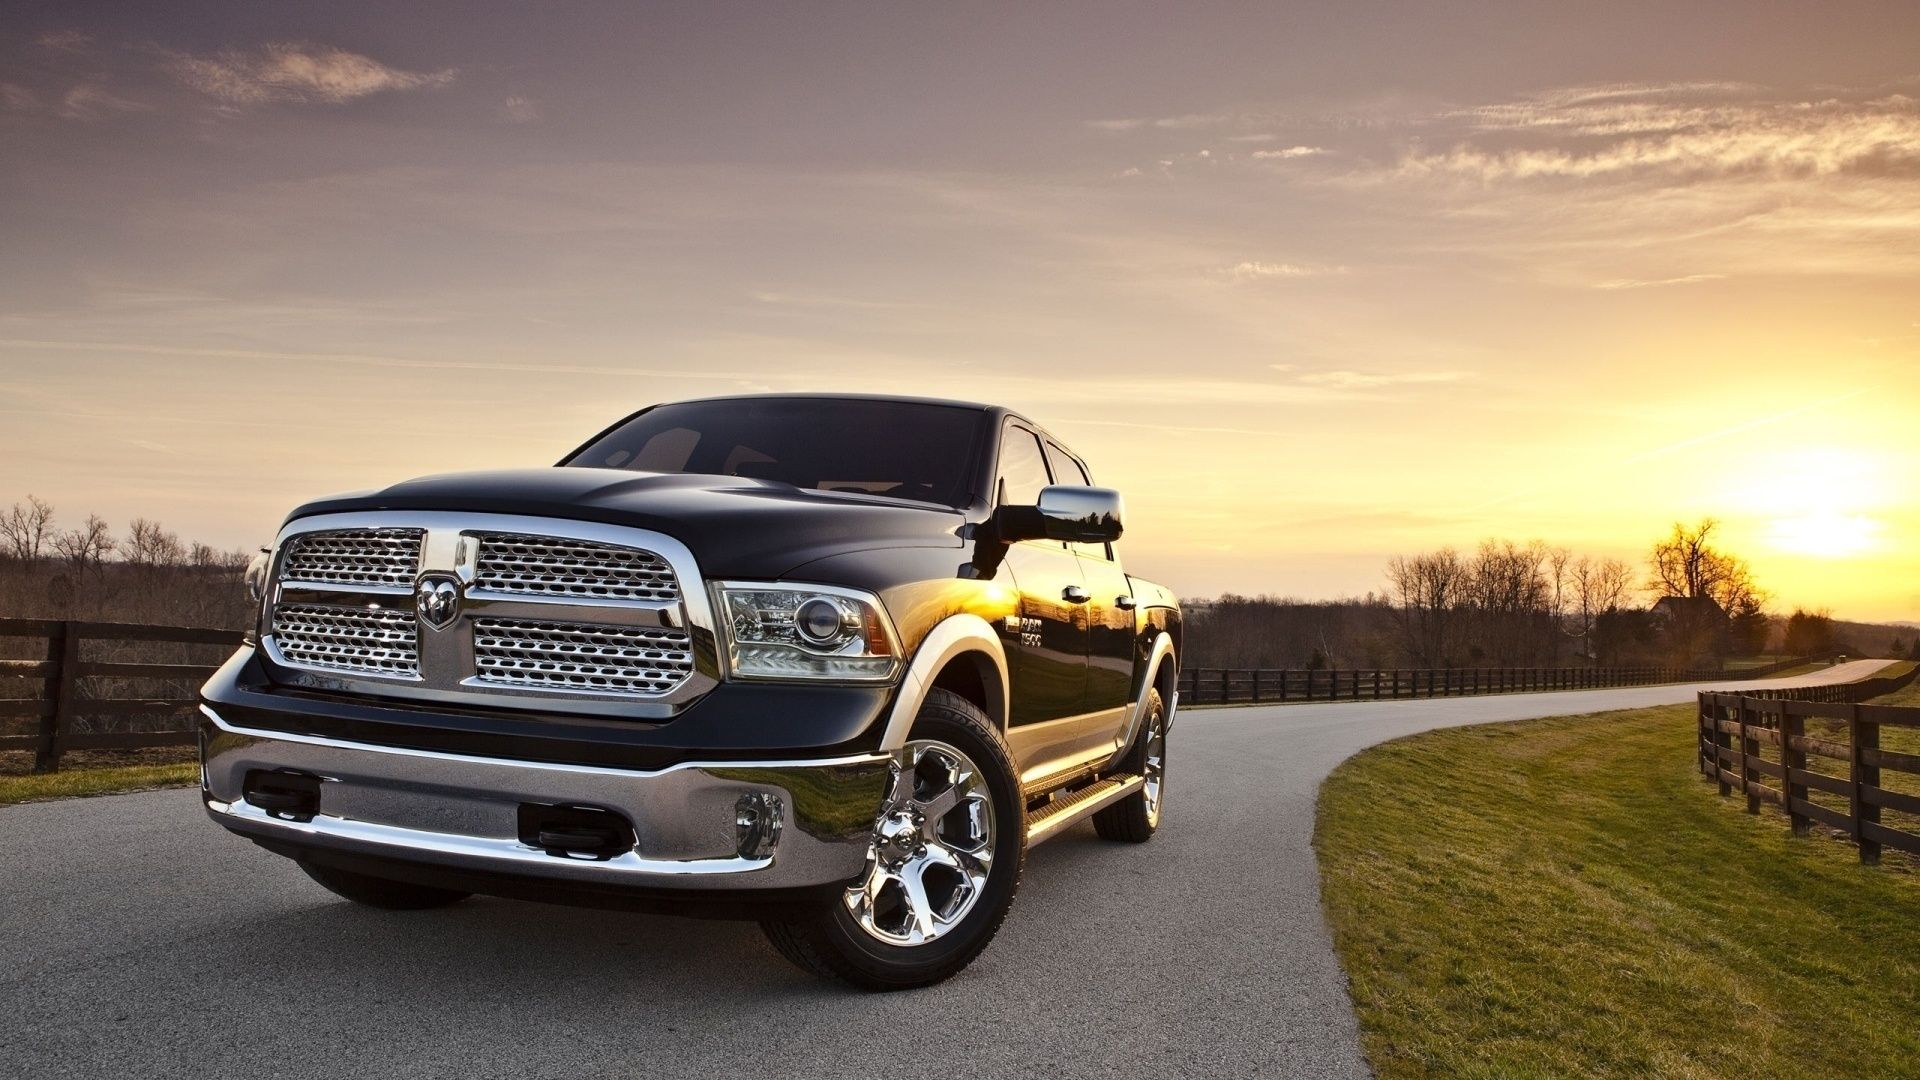 Dodge Ram background picture hd